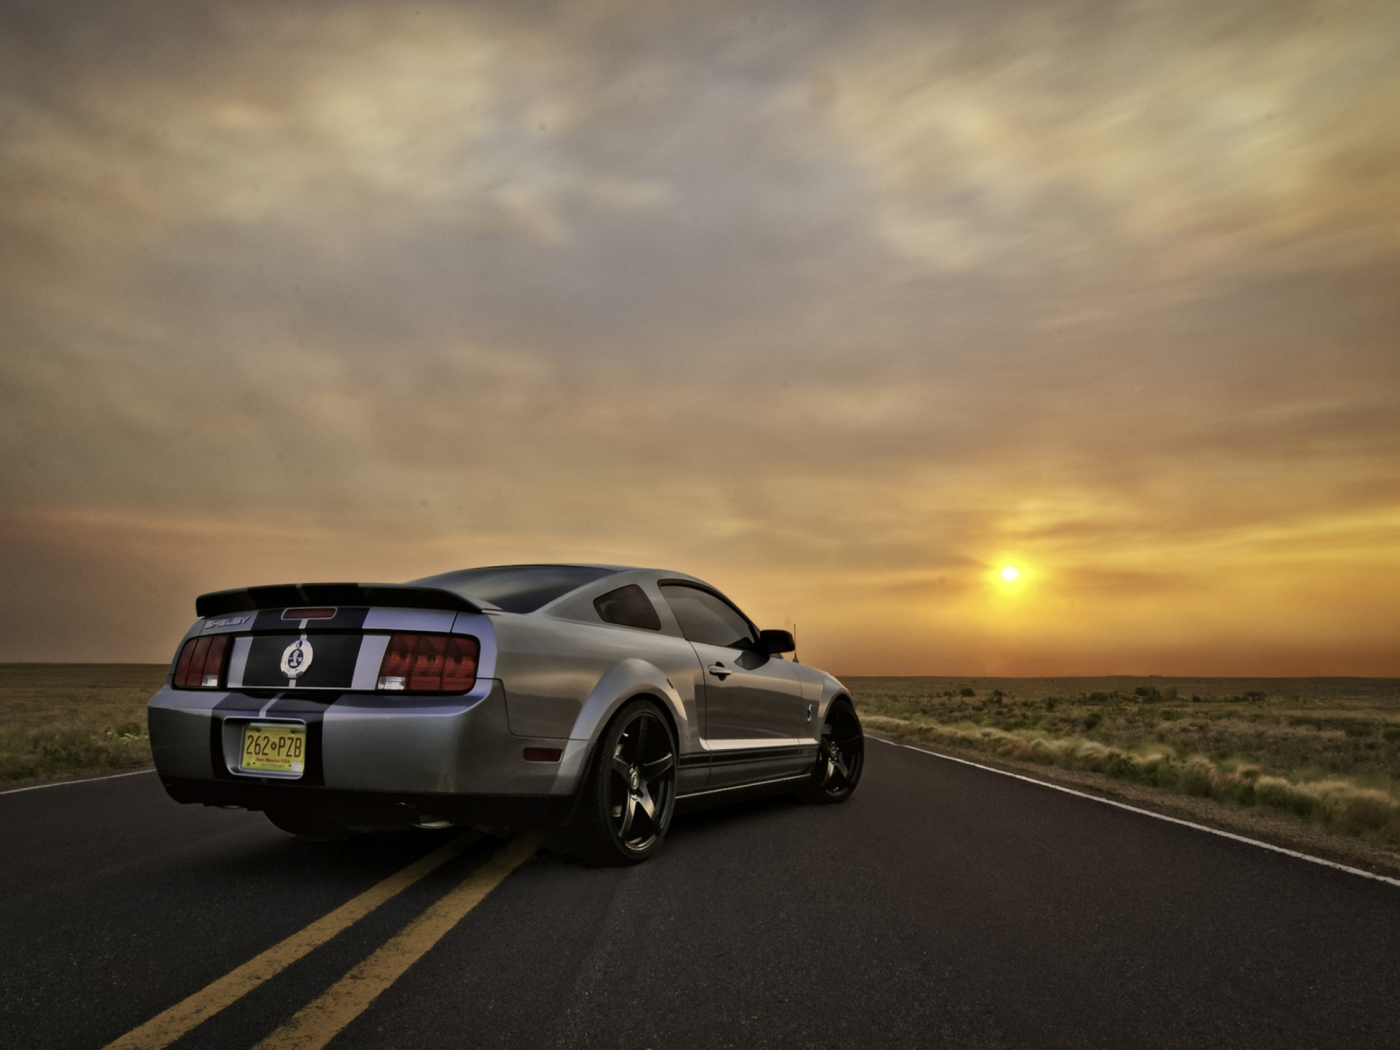 Ford Mustang Shelby GT500 wallpaper 1400x1050